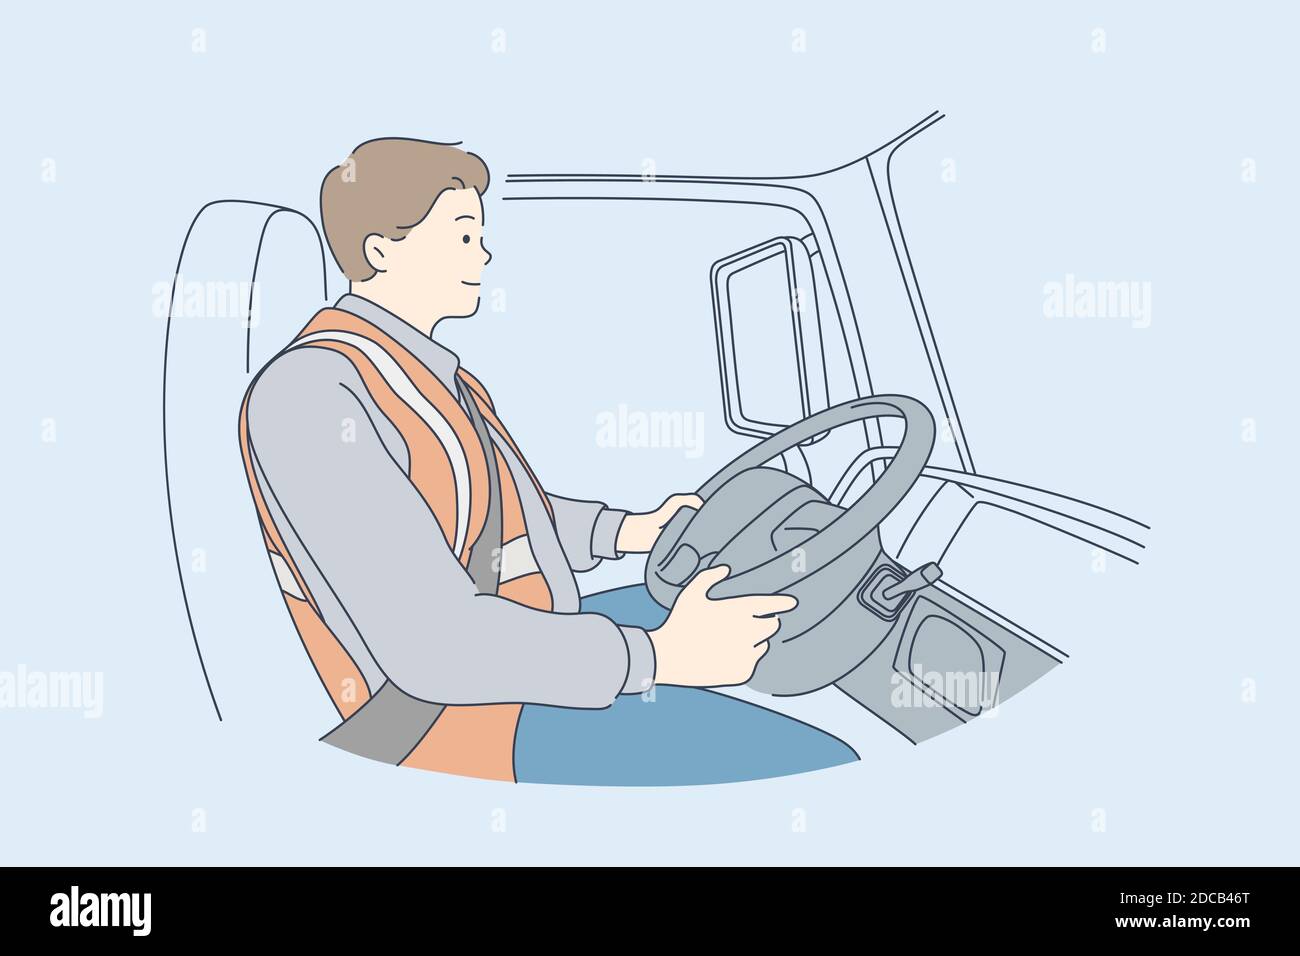 Delivery, driving concept. Young man or boy car driver cartoon character. Truck driver sitting in cabin of vehicle looks on road. Delivering services Stock Vector